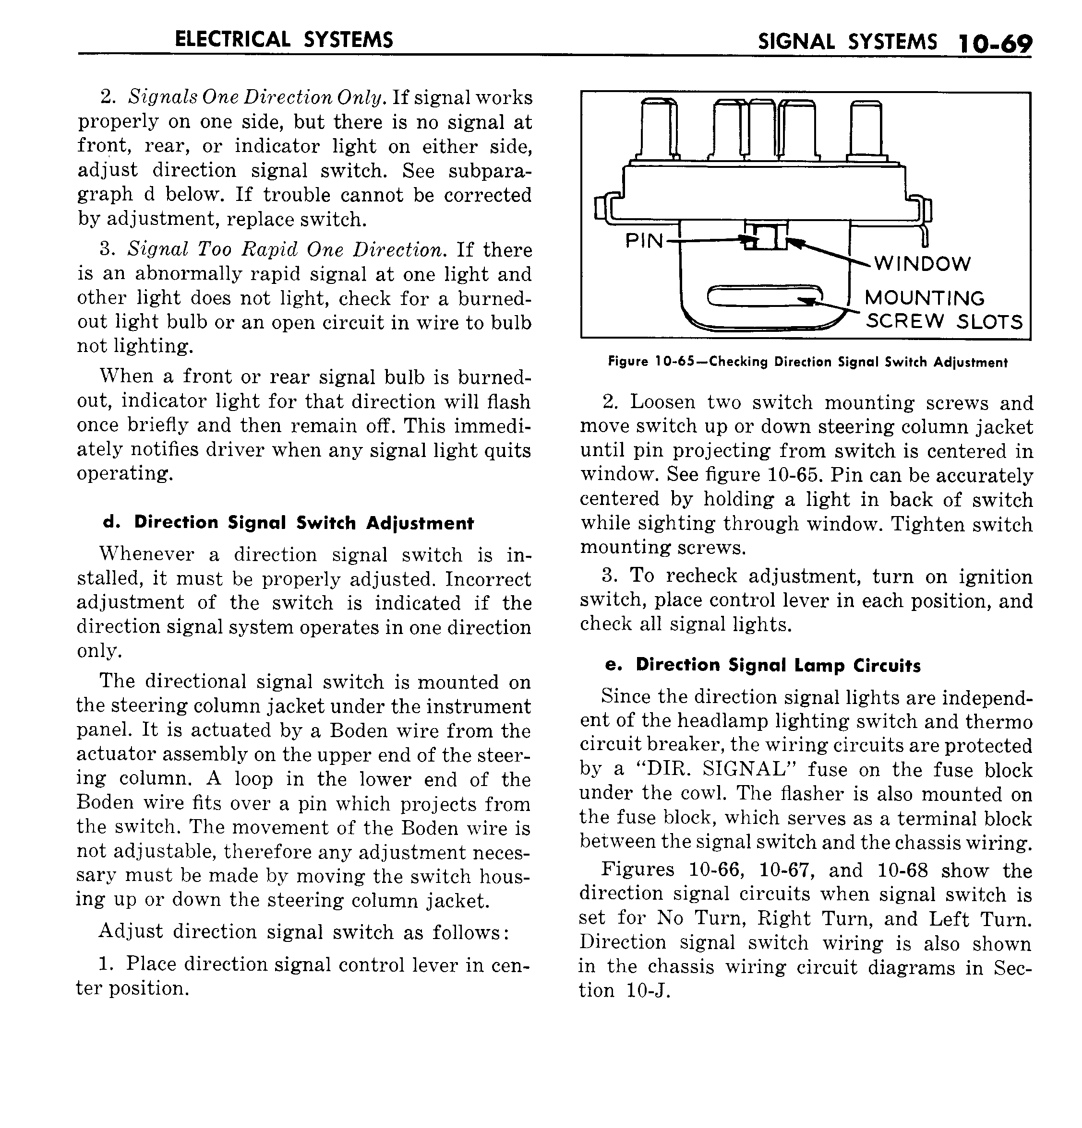 n_11 1957 Buick Shop Manual - Electrical Systems-069-069.jpg